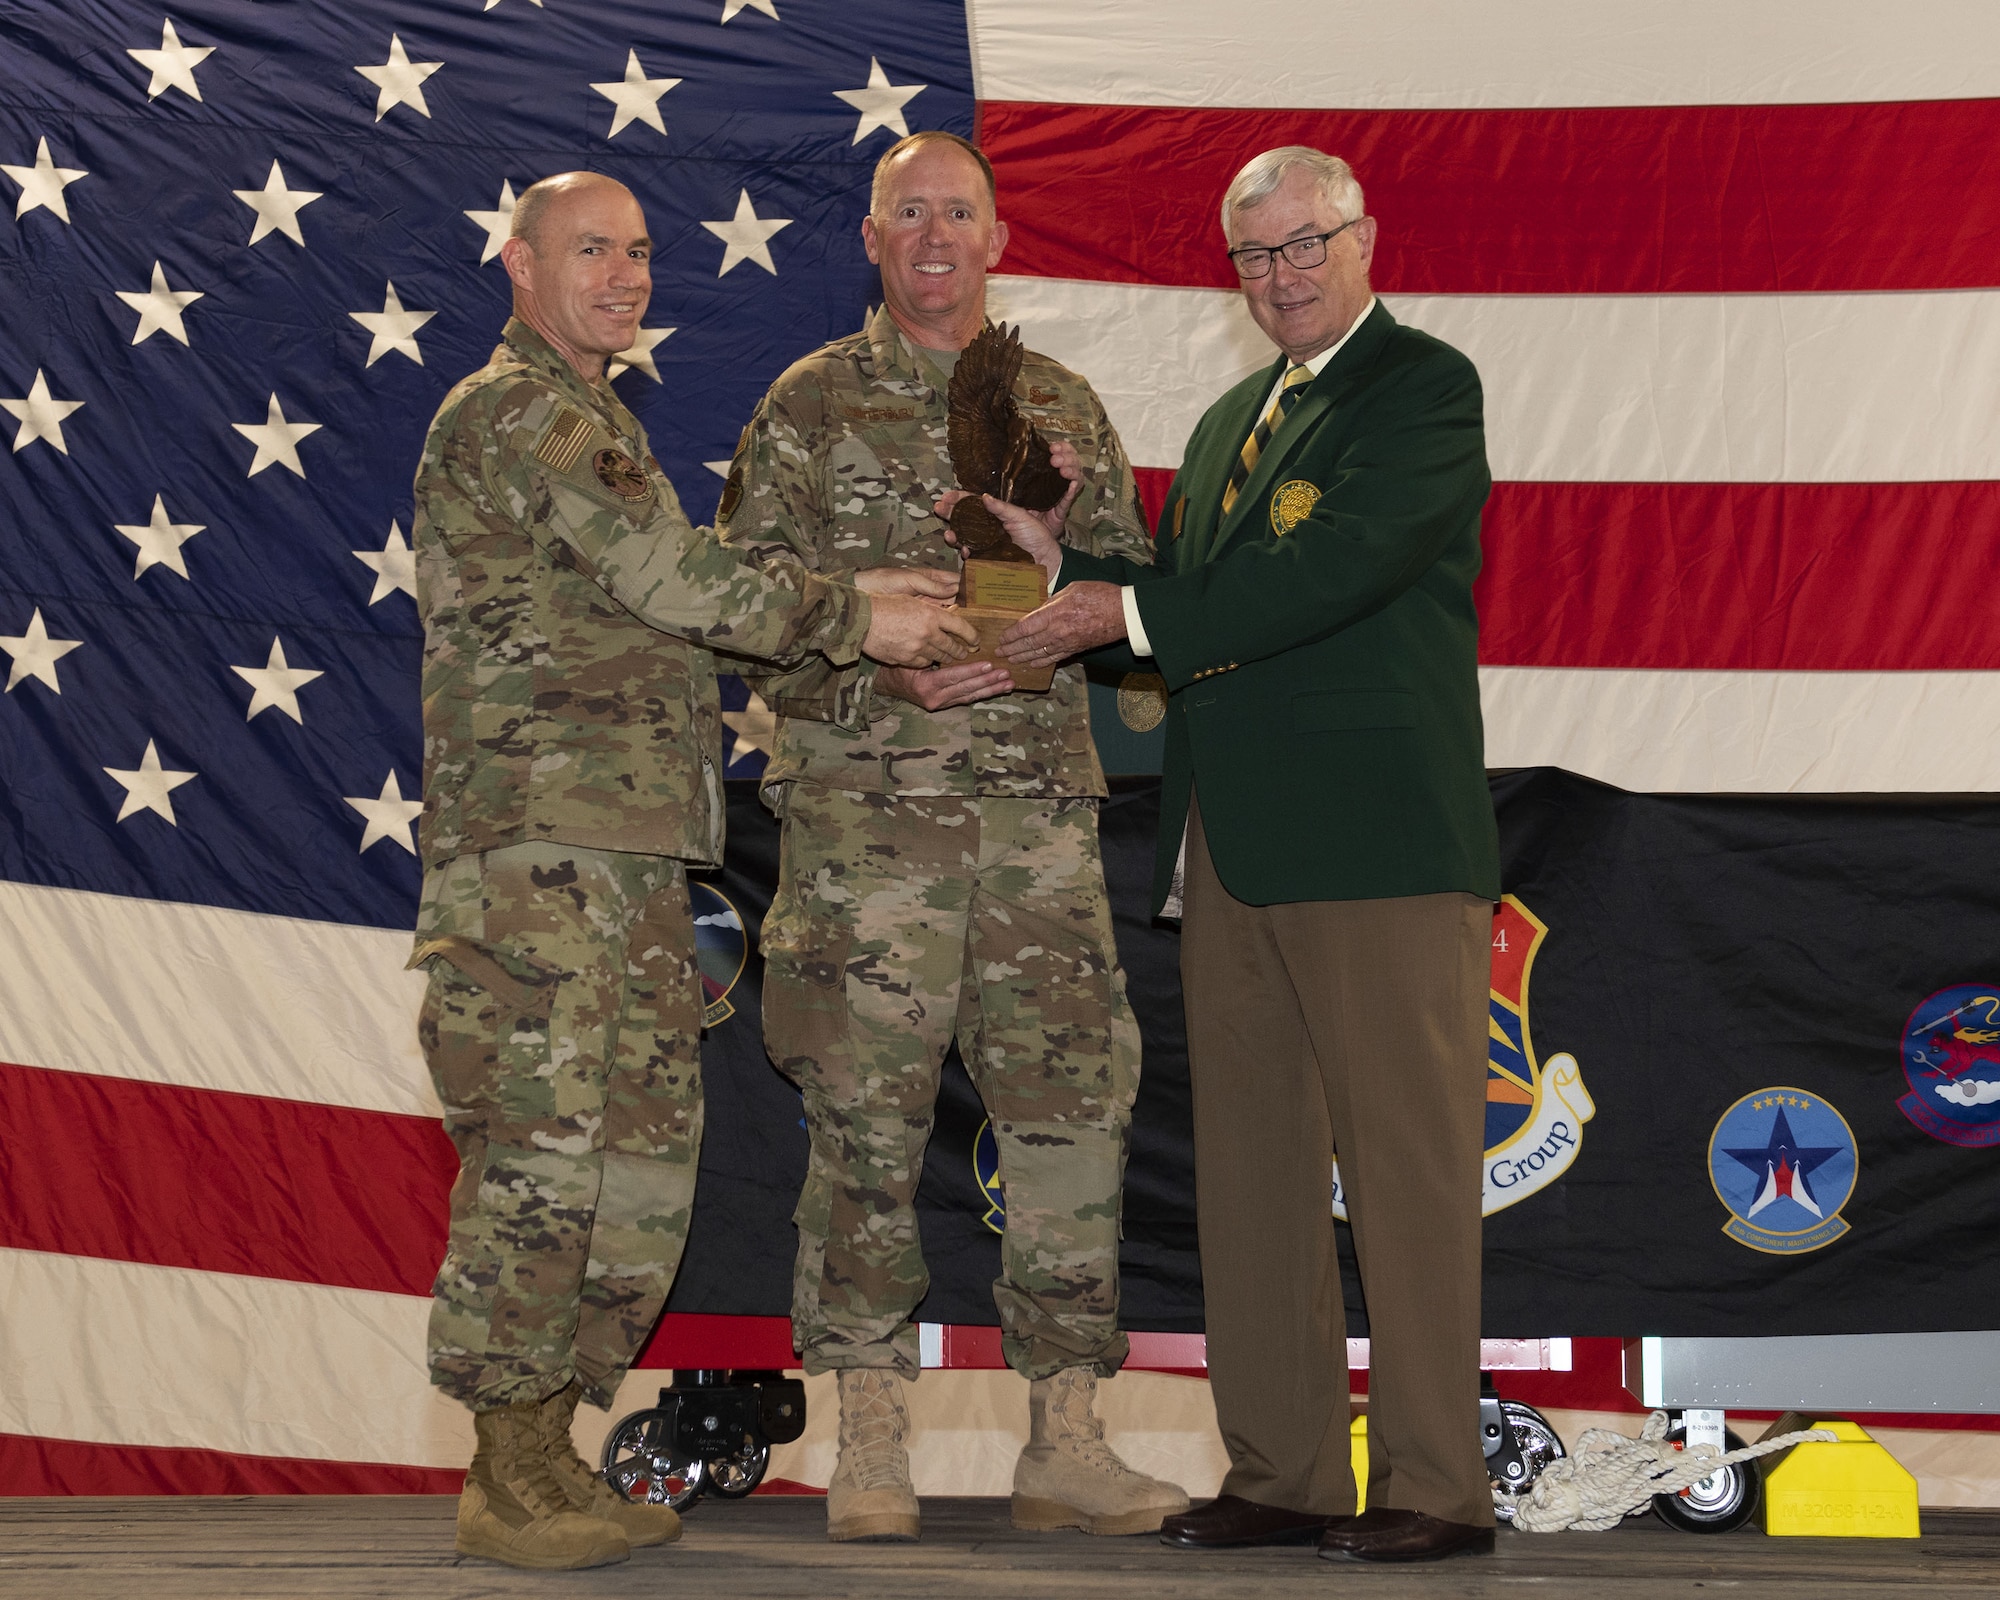 Brig. Gen. Todd Canterbury, 56th Fighter Wing commander (center), receives the 2018 Clements McMullen Memorial Maintenance Daedalian Trophy during a ceremony at Luke Air Force Base, Ariz., May 30, 2019. Awarded annually by the Secretary of the Air Force, the award is presented to the Air Force unit with the greatest weapon system maintenance record for the prior year. The 56th FW, led by its more than 3,334 maintenance personnel.